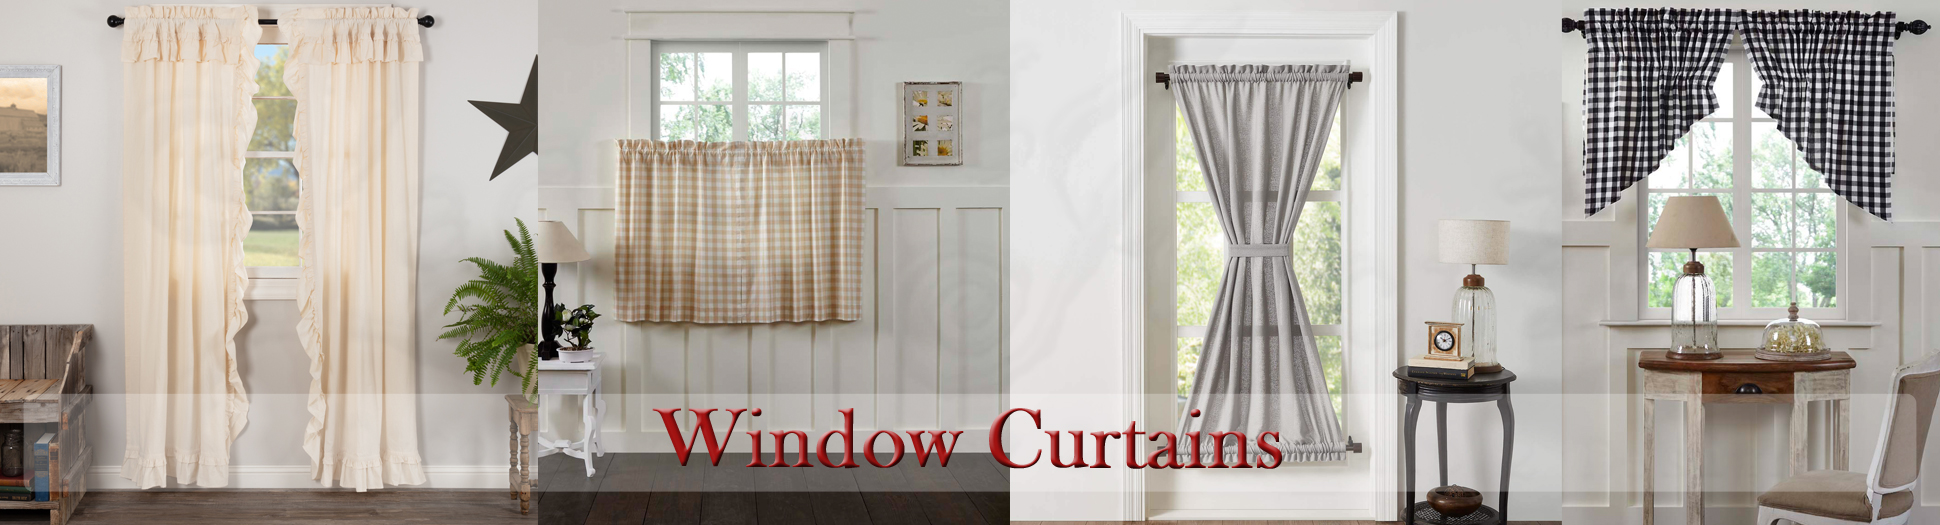 Window Treatments from VHC Brands